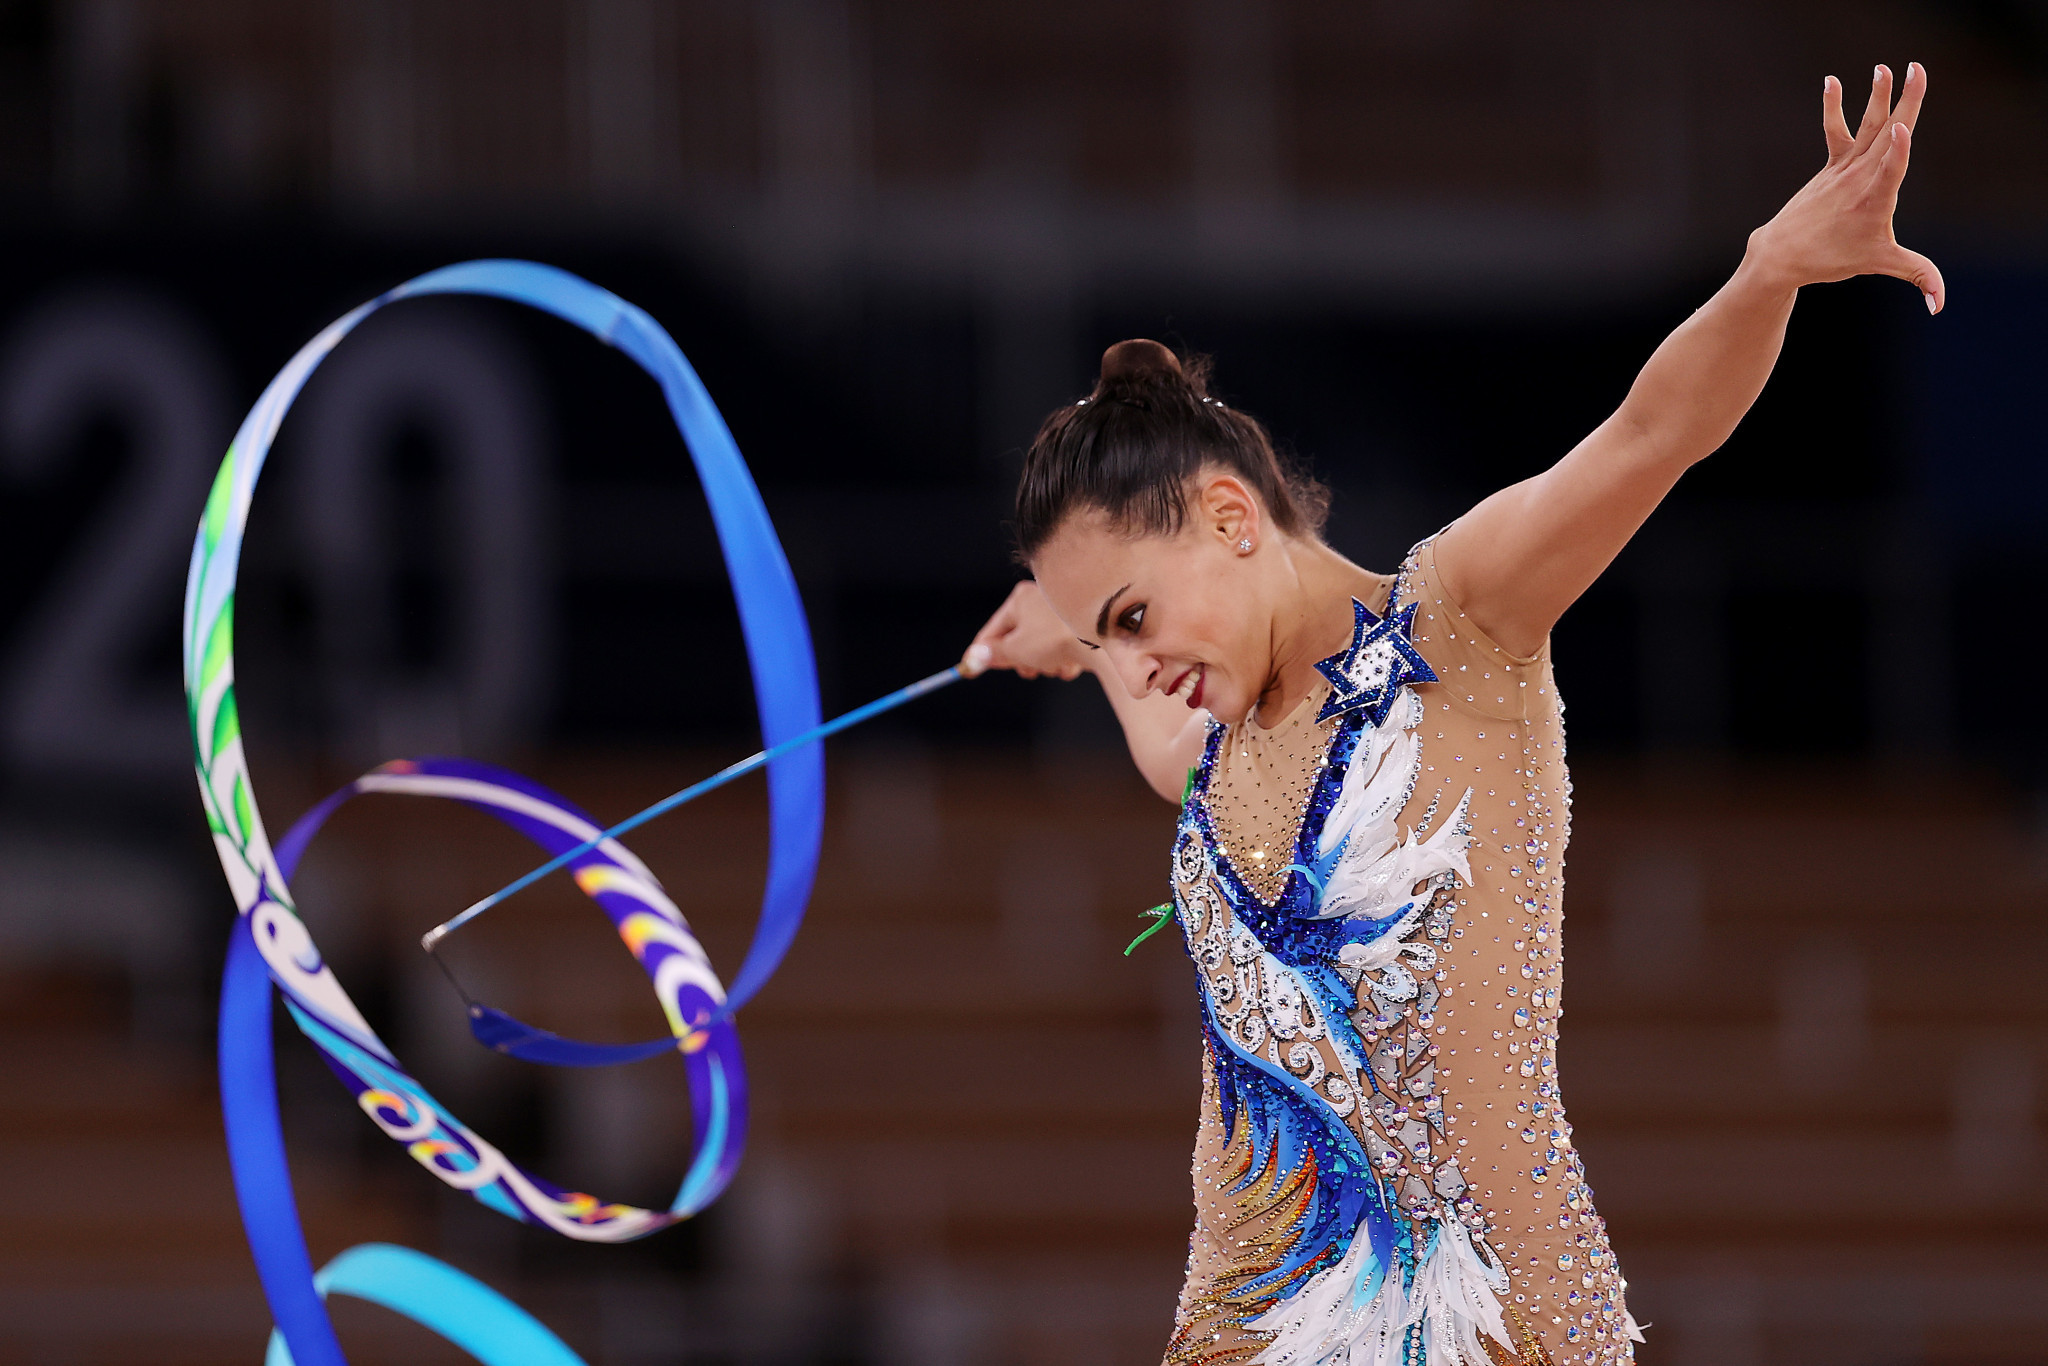 Linoy Ashram of Israel sprung a surprise in winning the women's rhythmic gymnastics title, at the expense of the ROC's Averina sisters, who finished second and fourth ©Getty Images